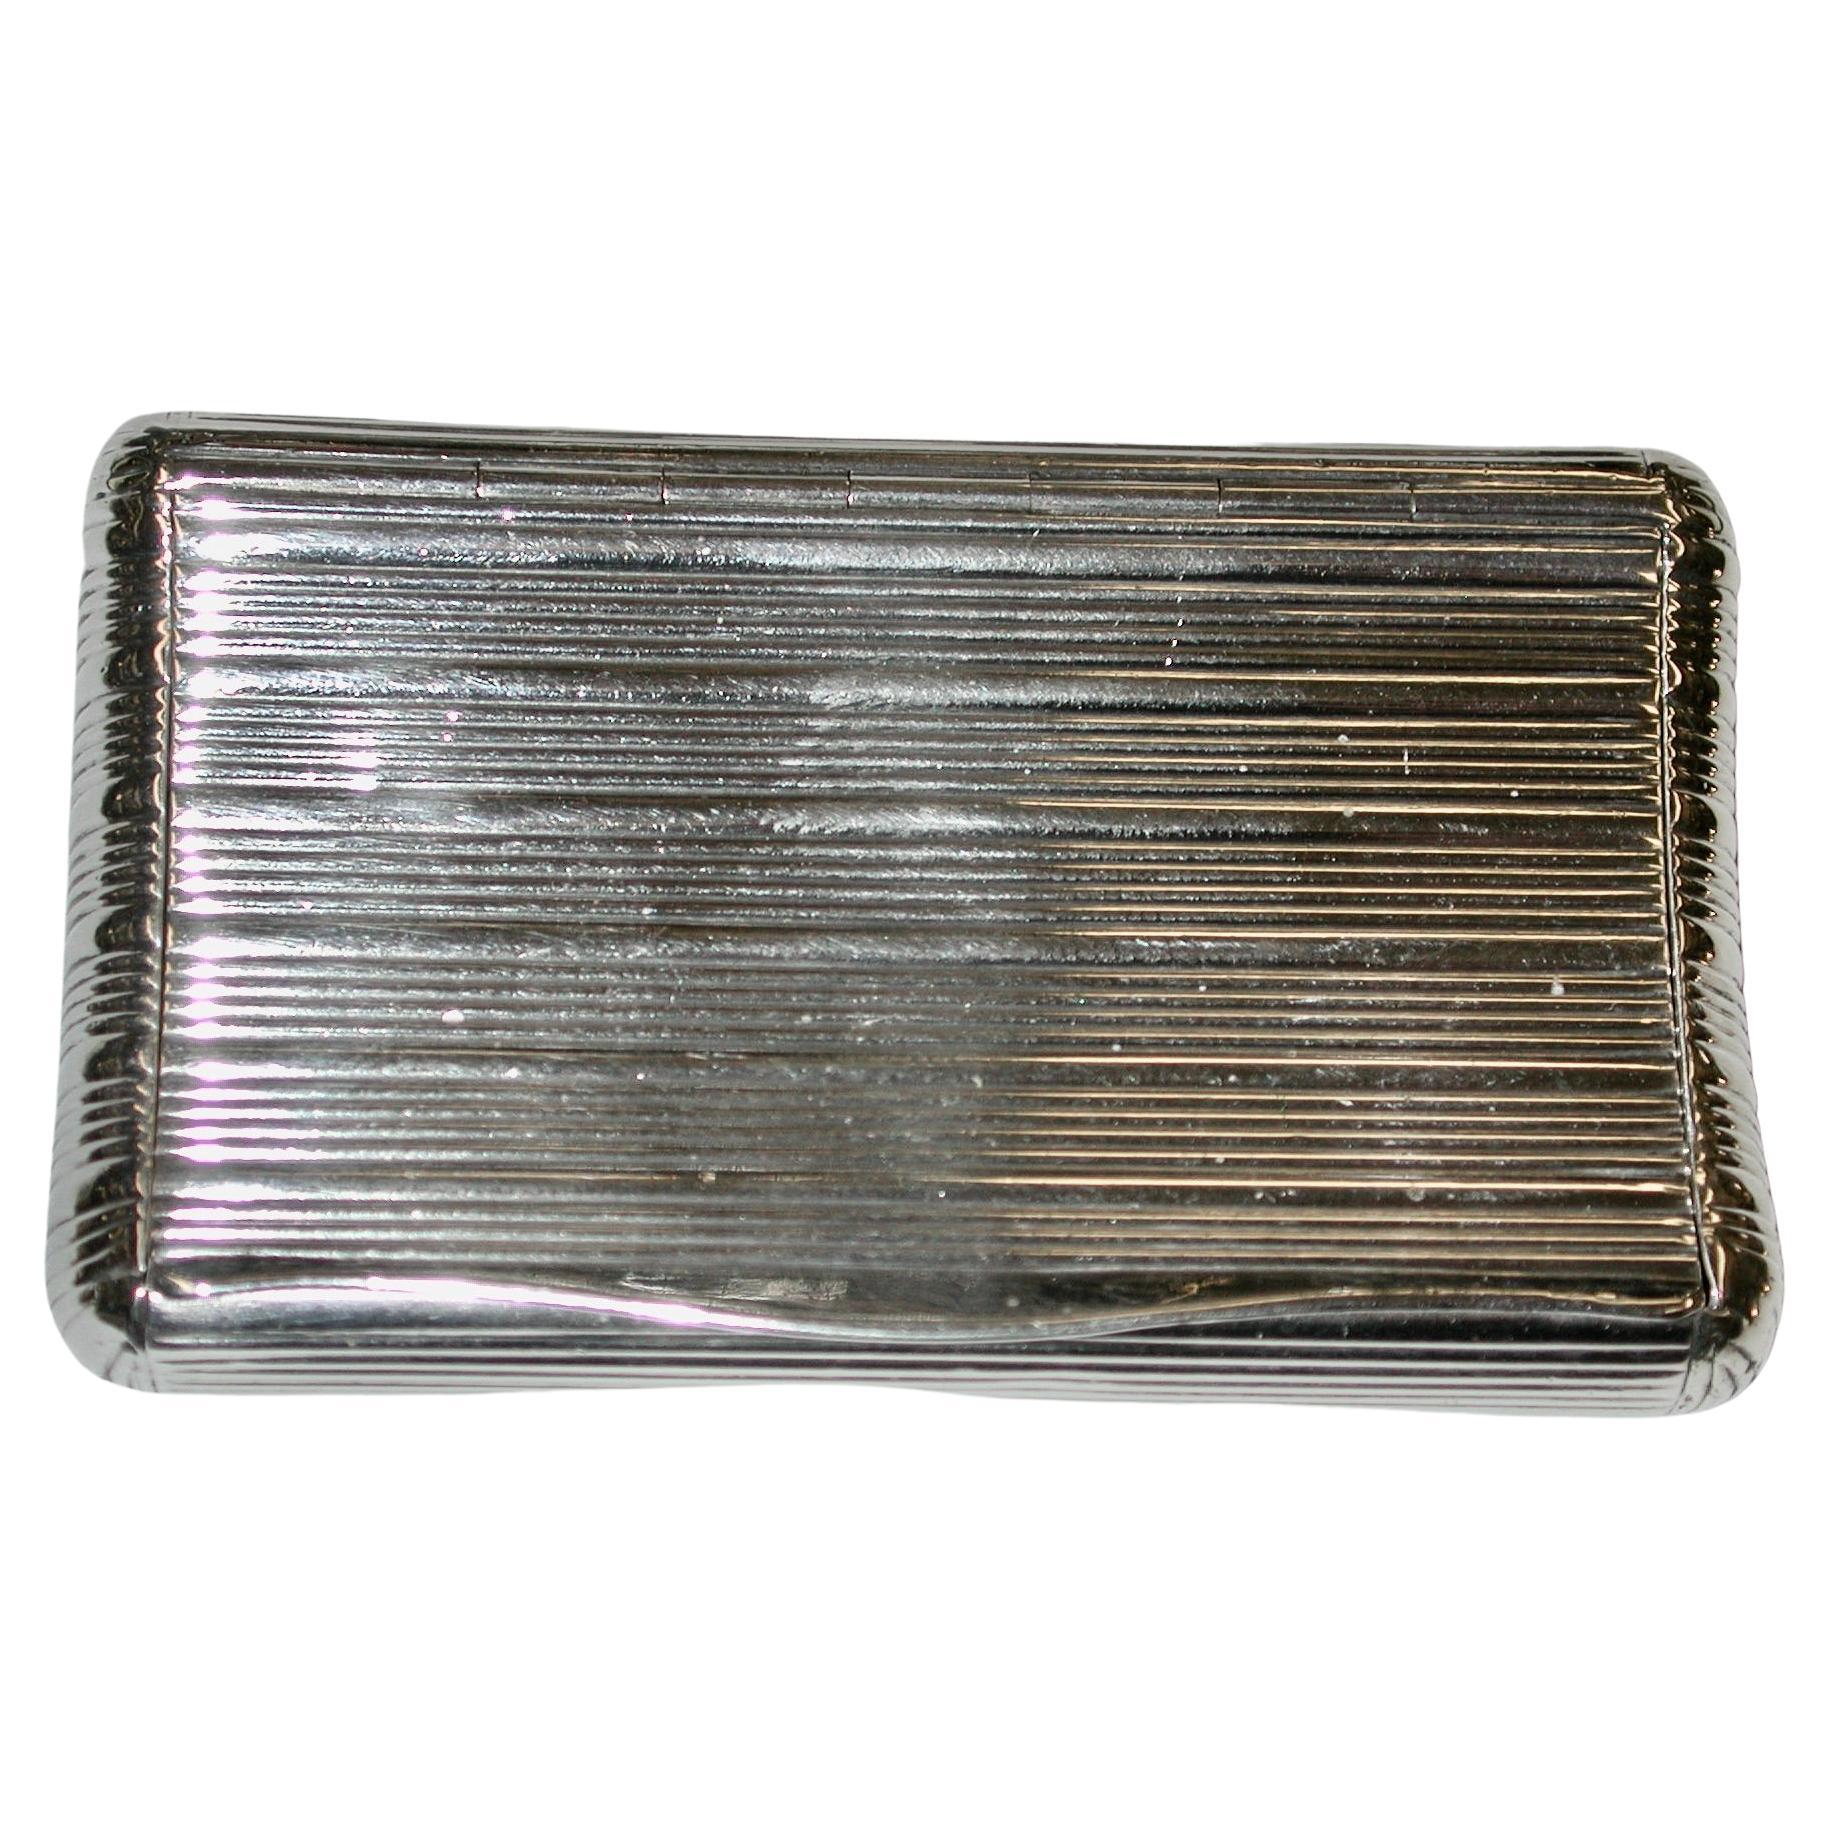 Antique French silver snuff box, Dated 1820, Made In Paris
Typical ribbed decoration all over with a nice flush hinge, and a curved shape to fit nicely in the pocket.
These days would make a superb pillbox, as it has a nice tight fit.
This box is